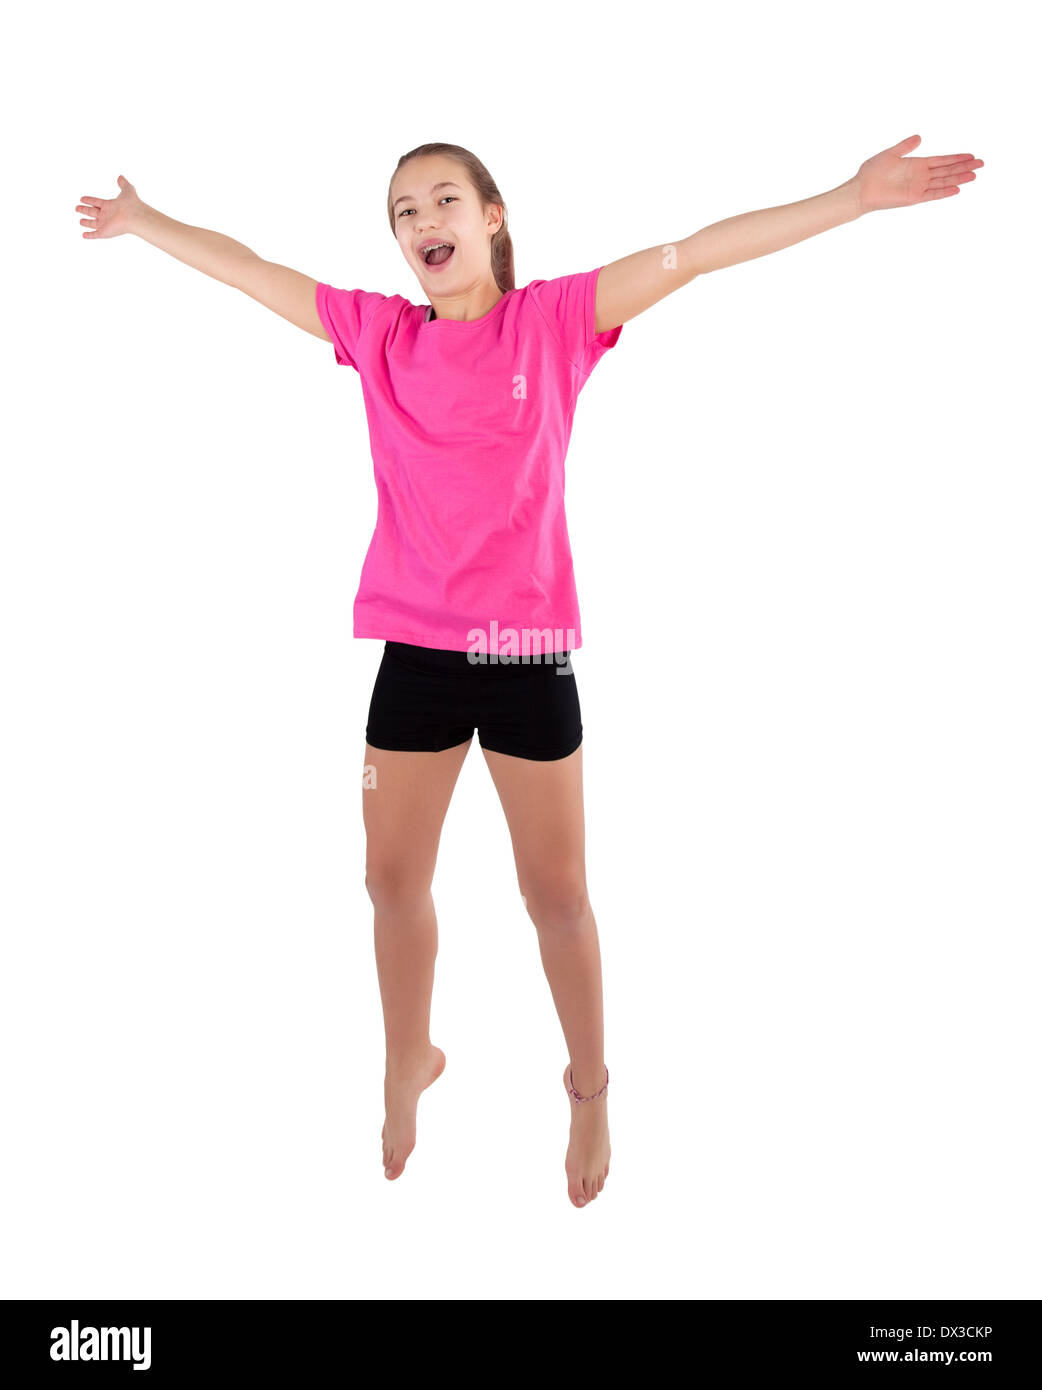 young girl jumping Stock Photo